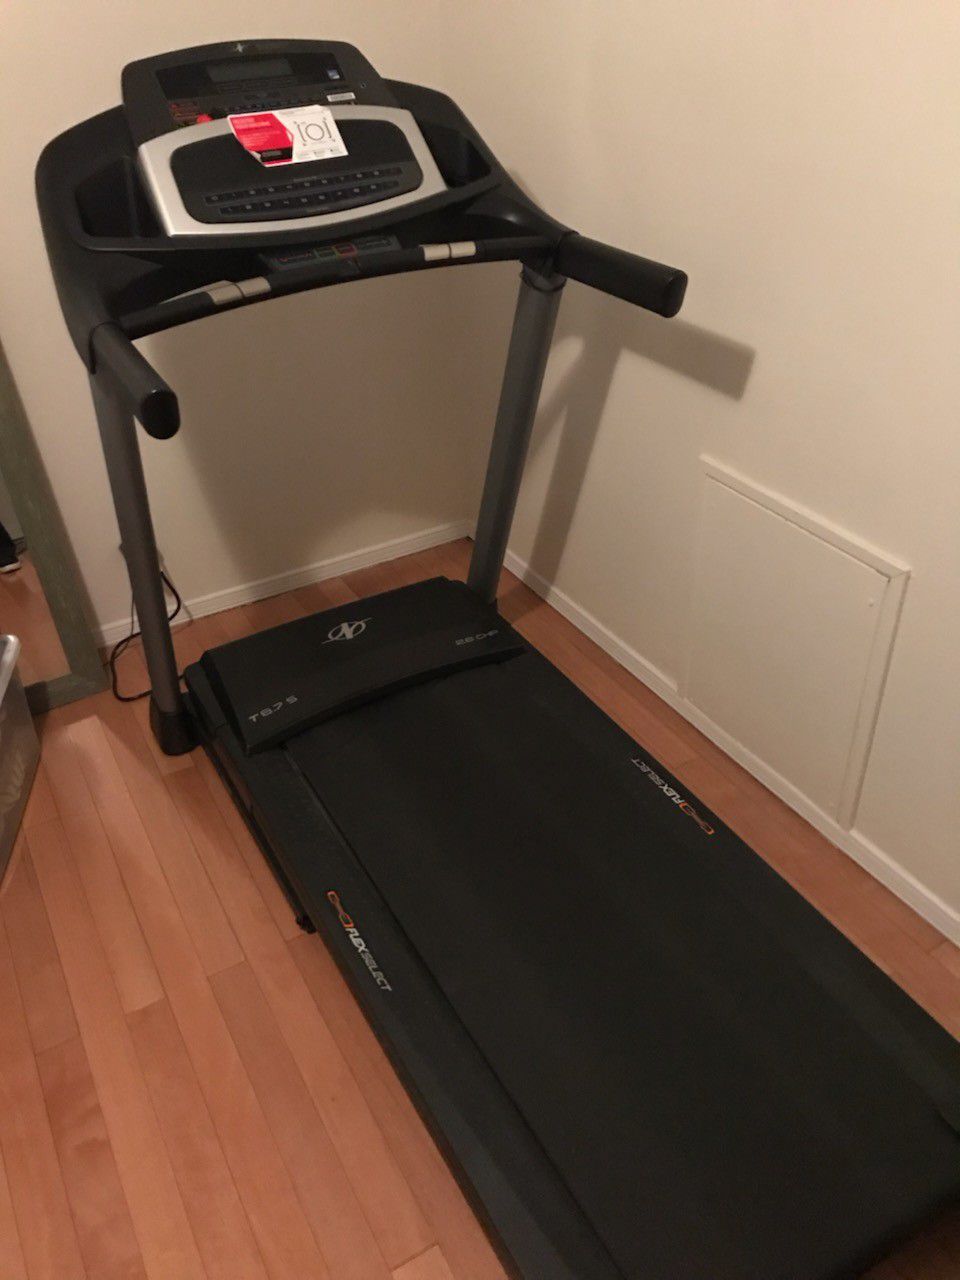 Norditrack treadmill. Only a year old.